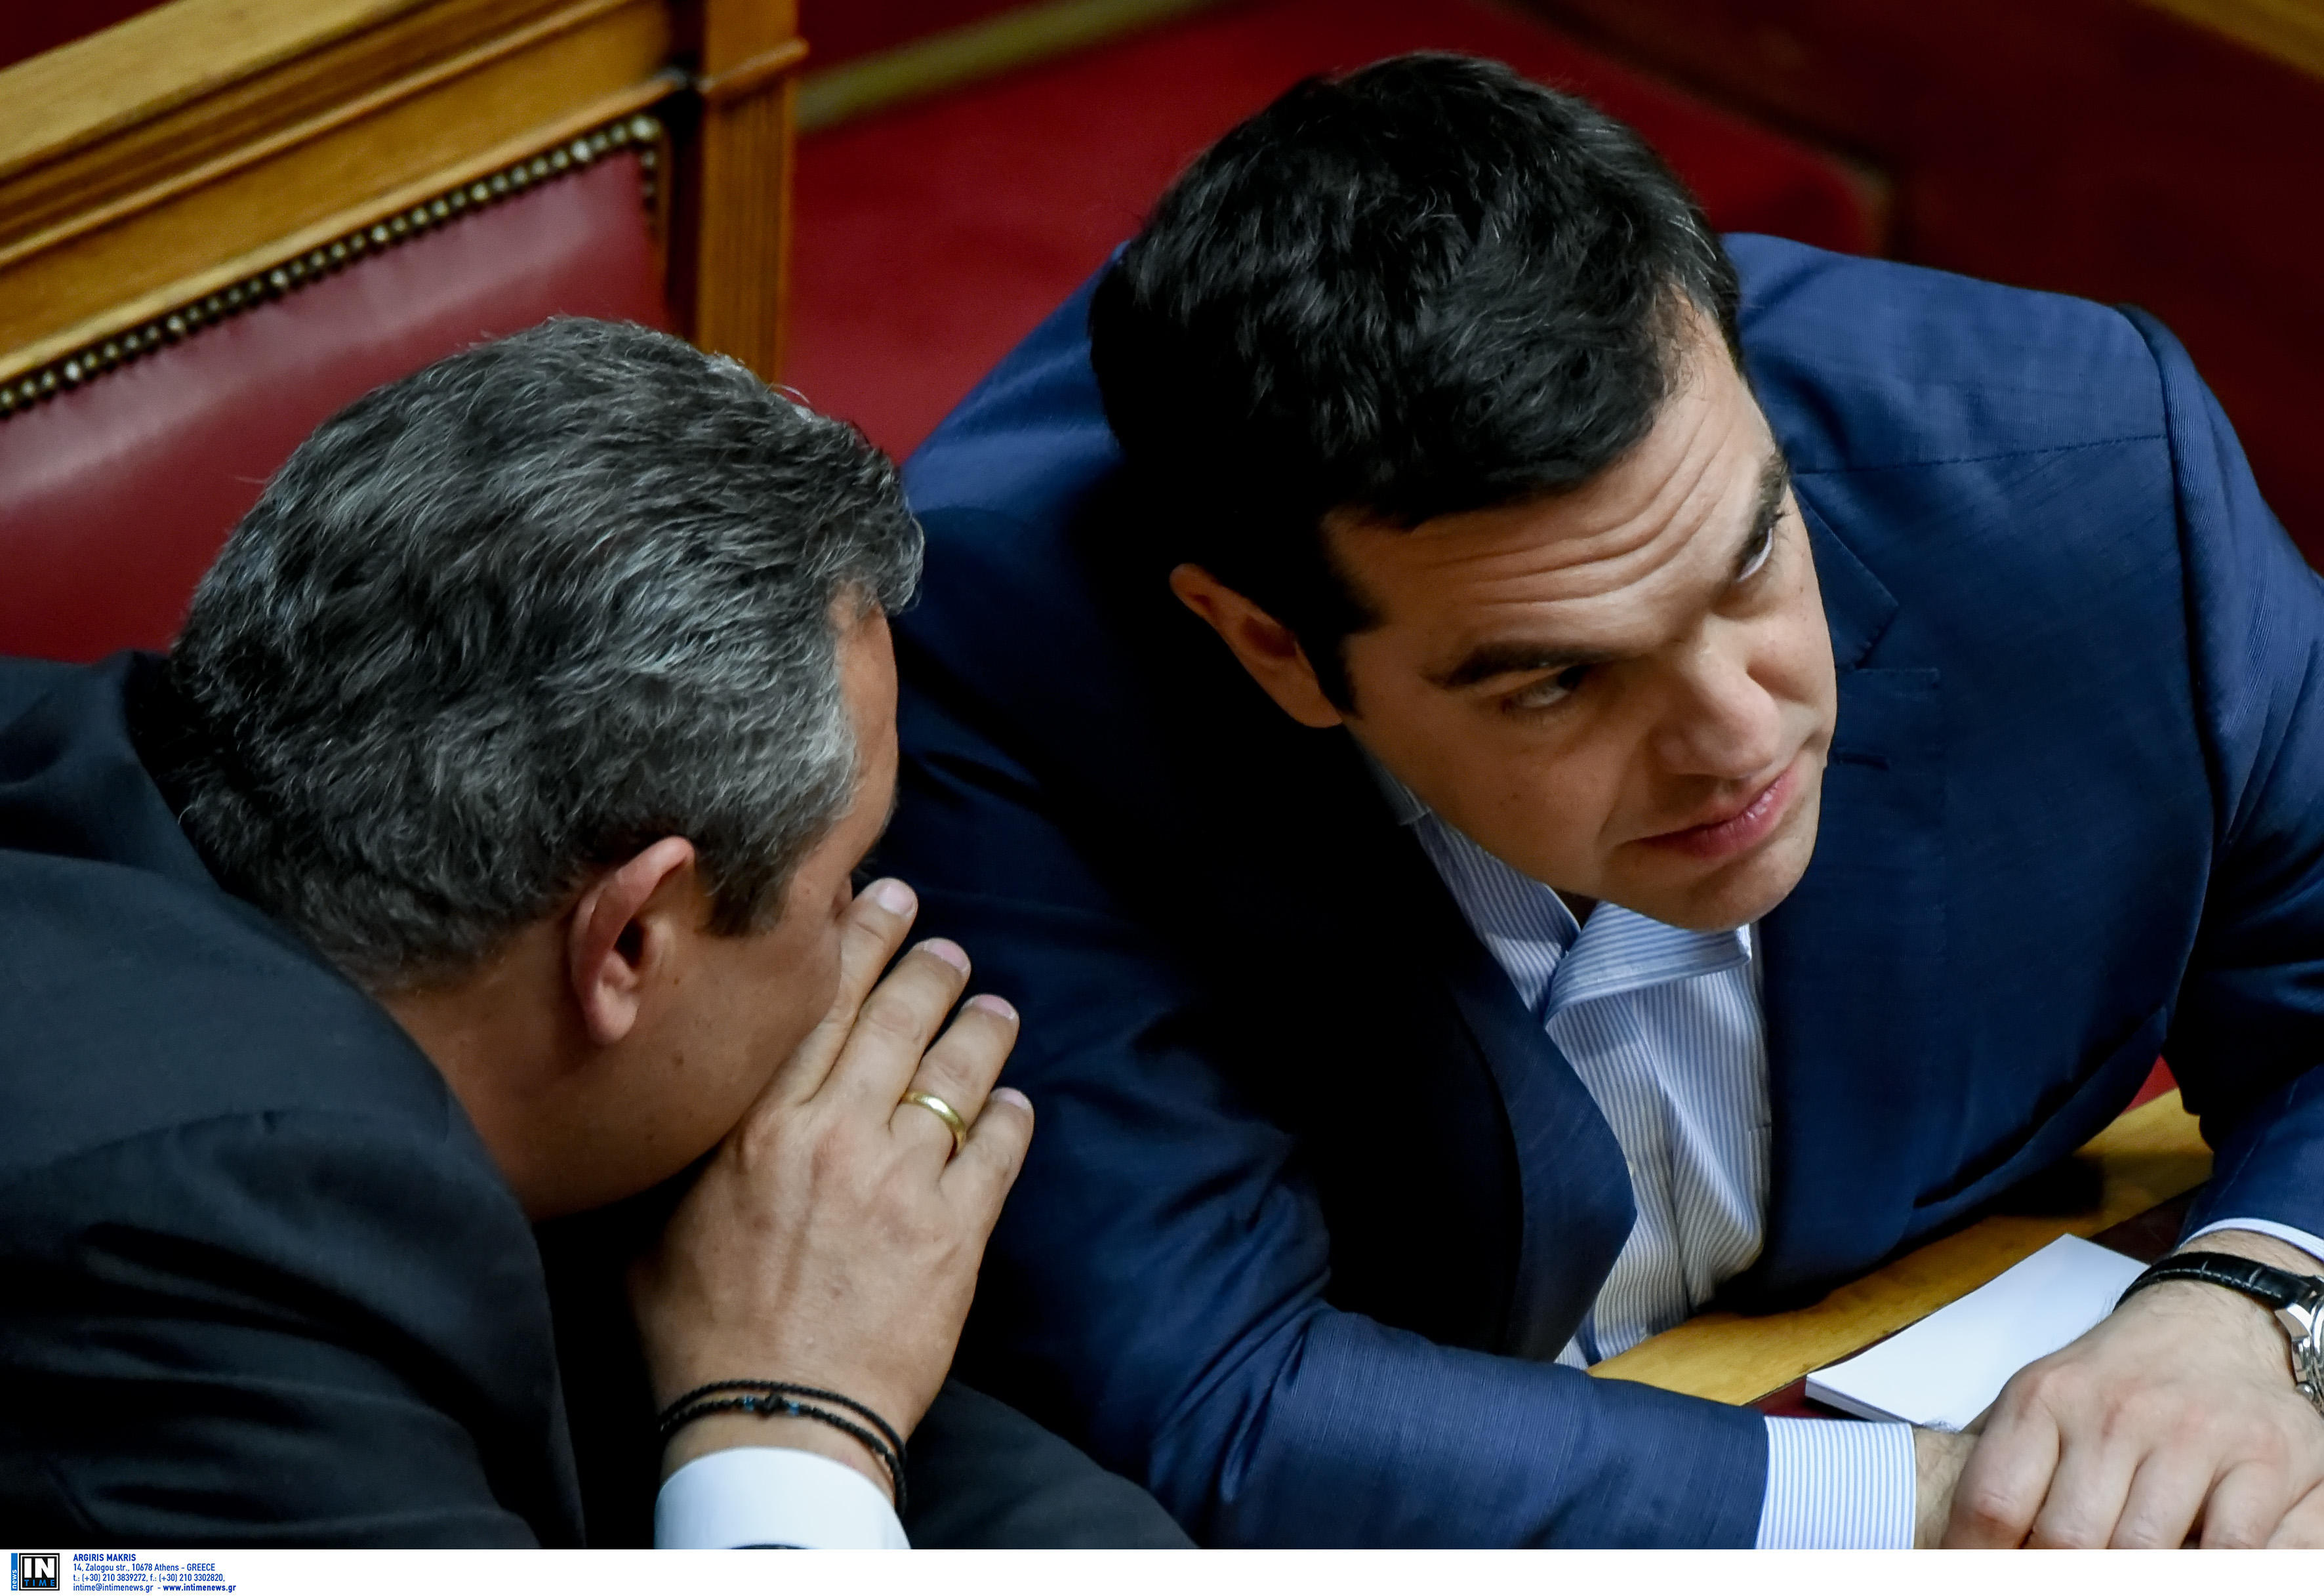 ND: Tsipras covering up Kammenos' scandal